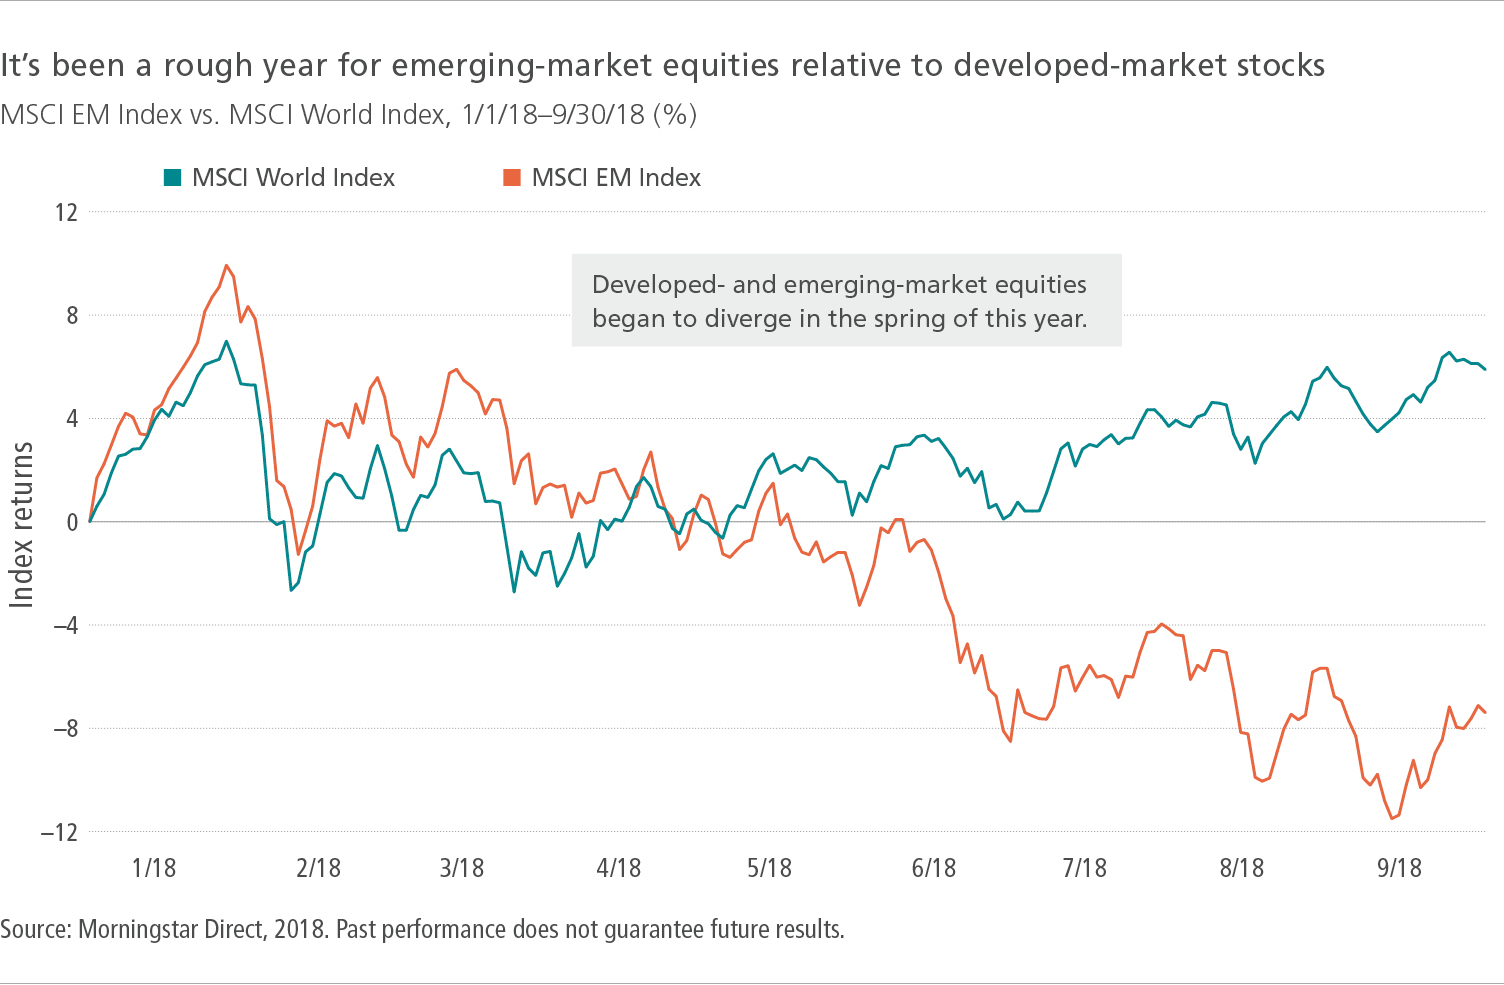 It's been a rough year for emerging markets